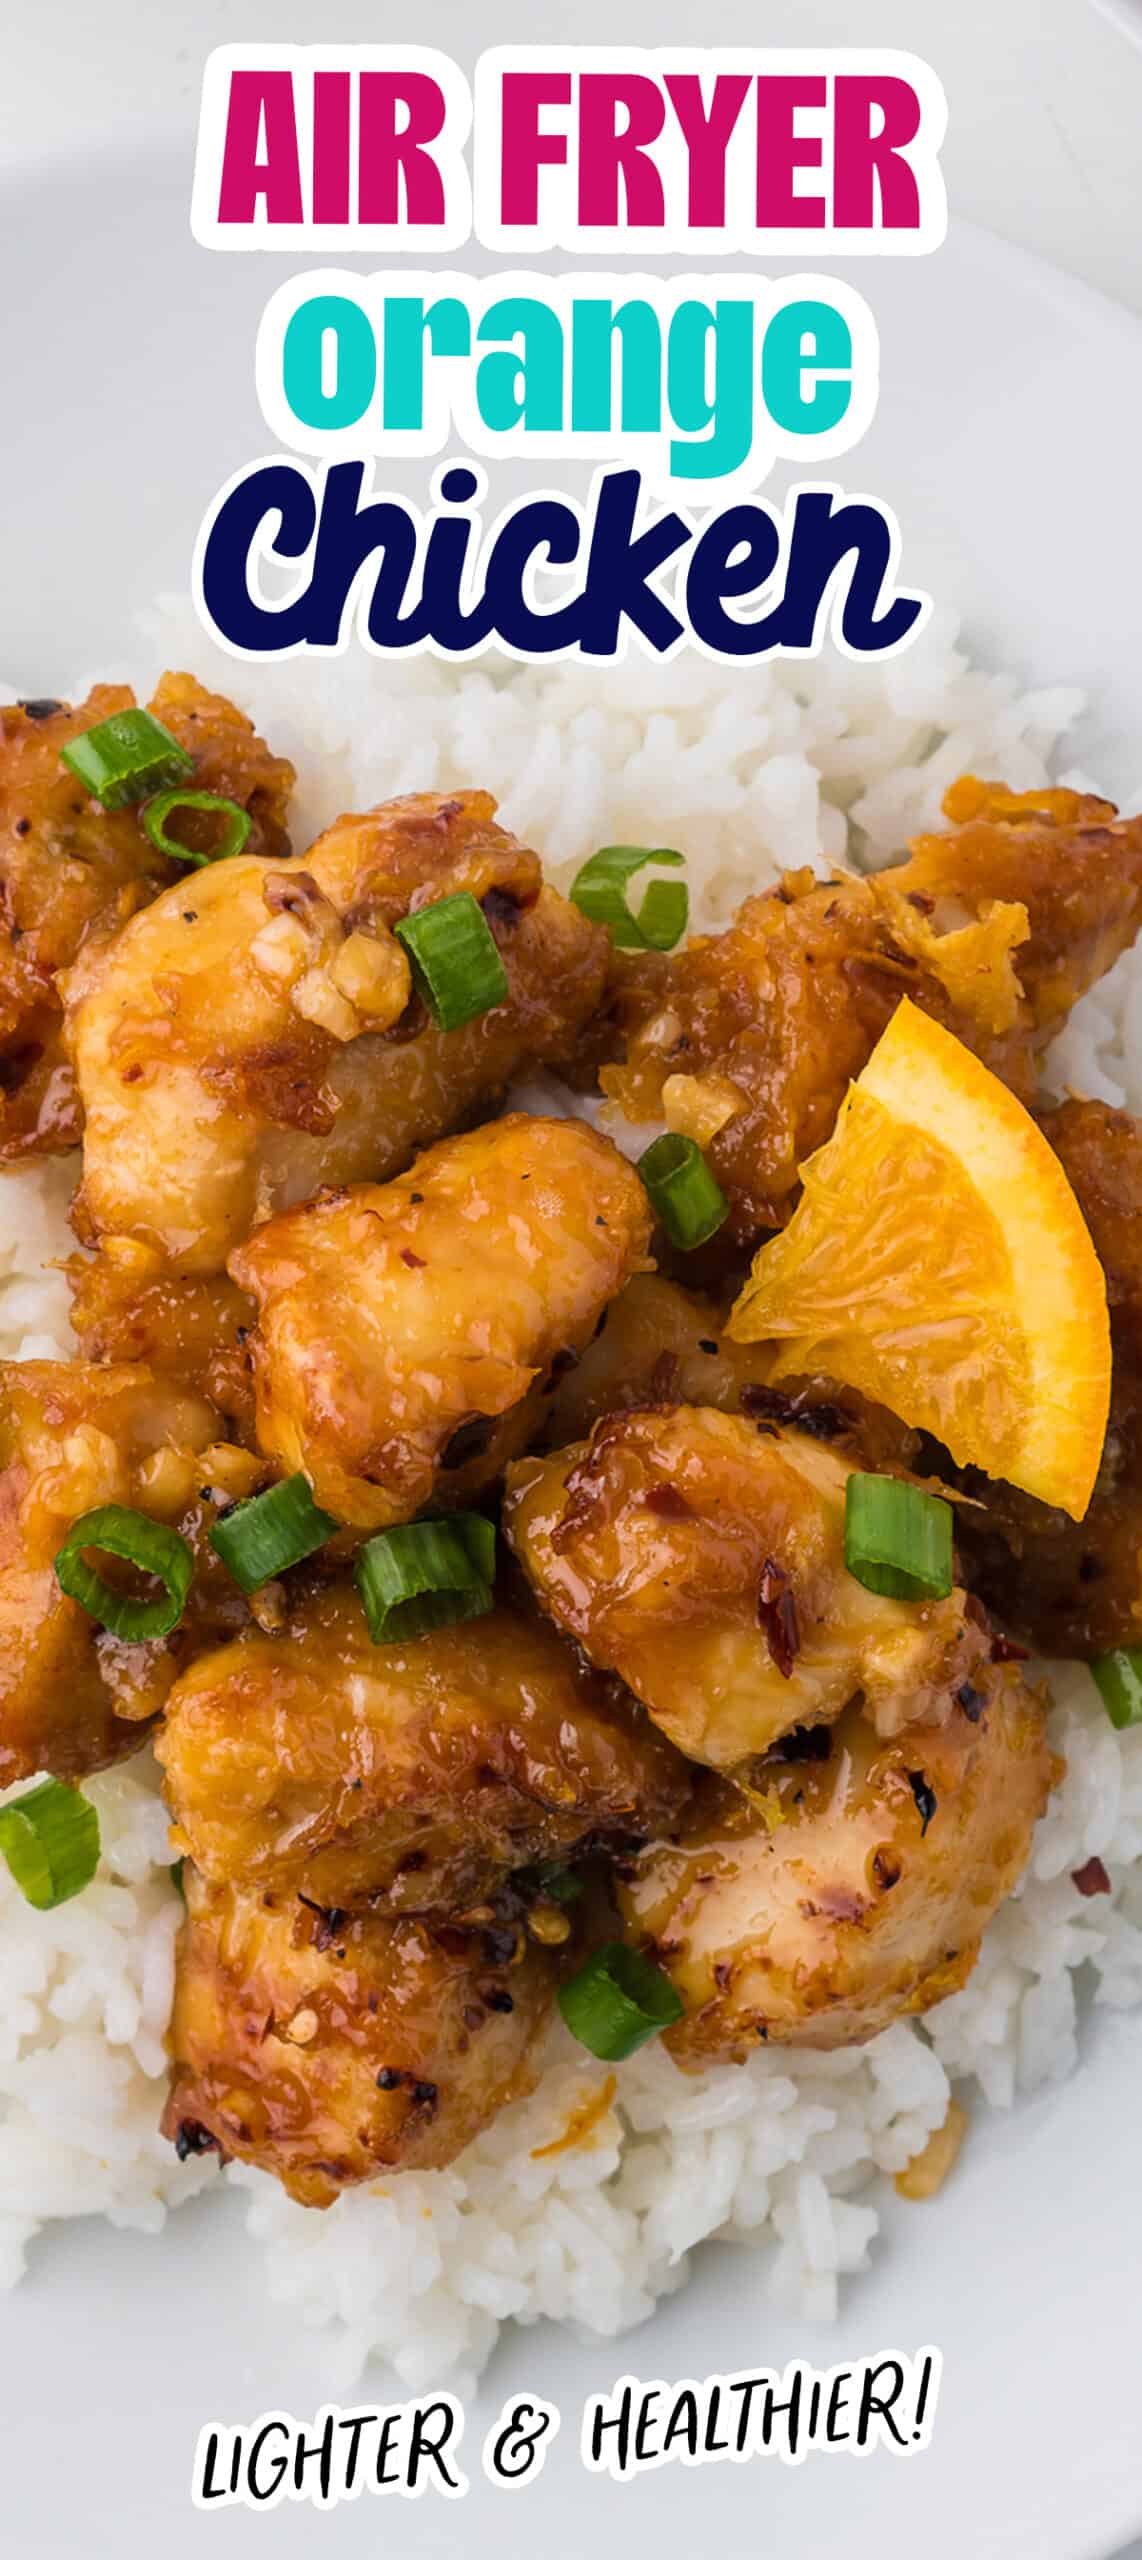 Air Fryer Orange Chicken is a delicious dish that combines the convenience of using an Air Fryer and the tangy flavor of orange chicken.